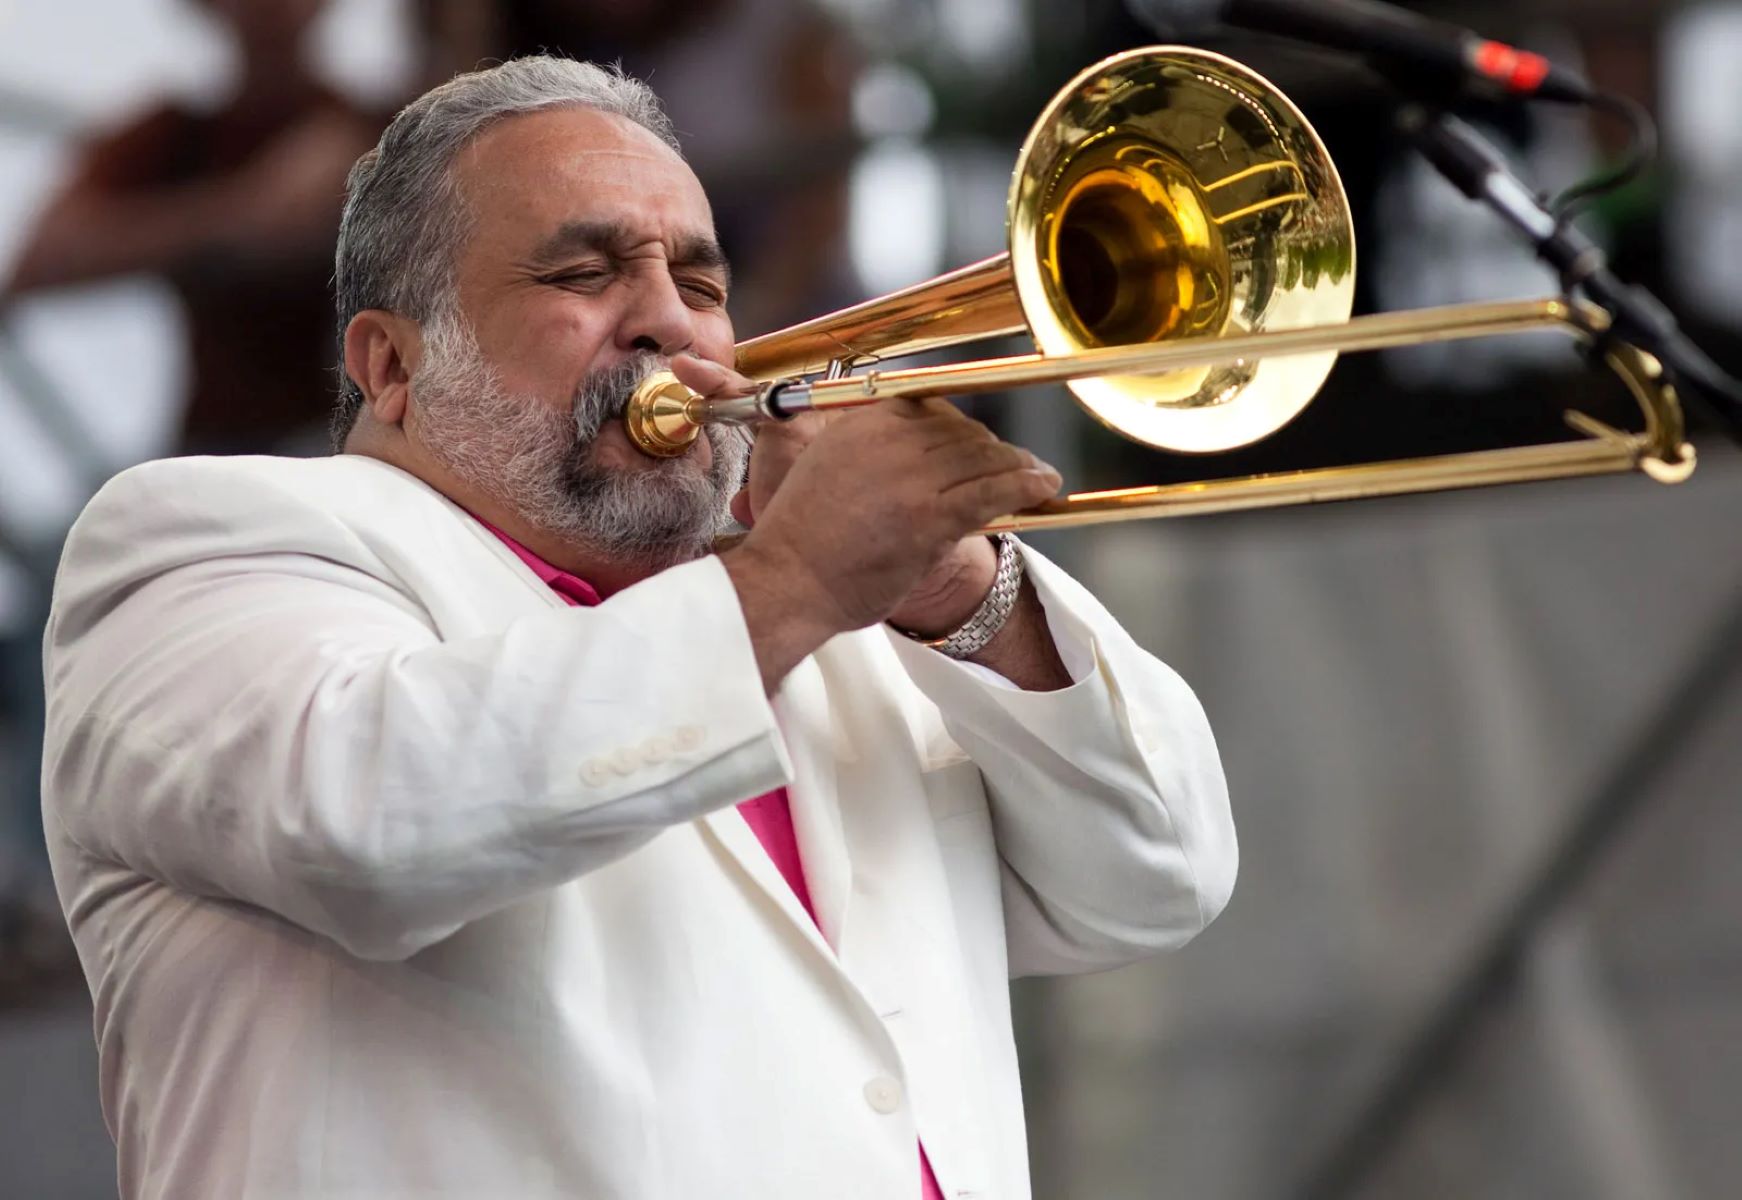 15-astounding-facts-about-willie-colon